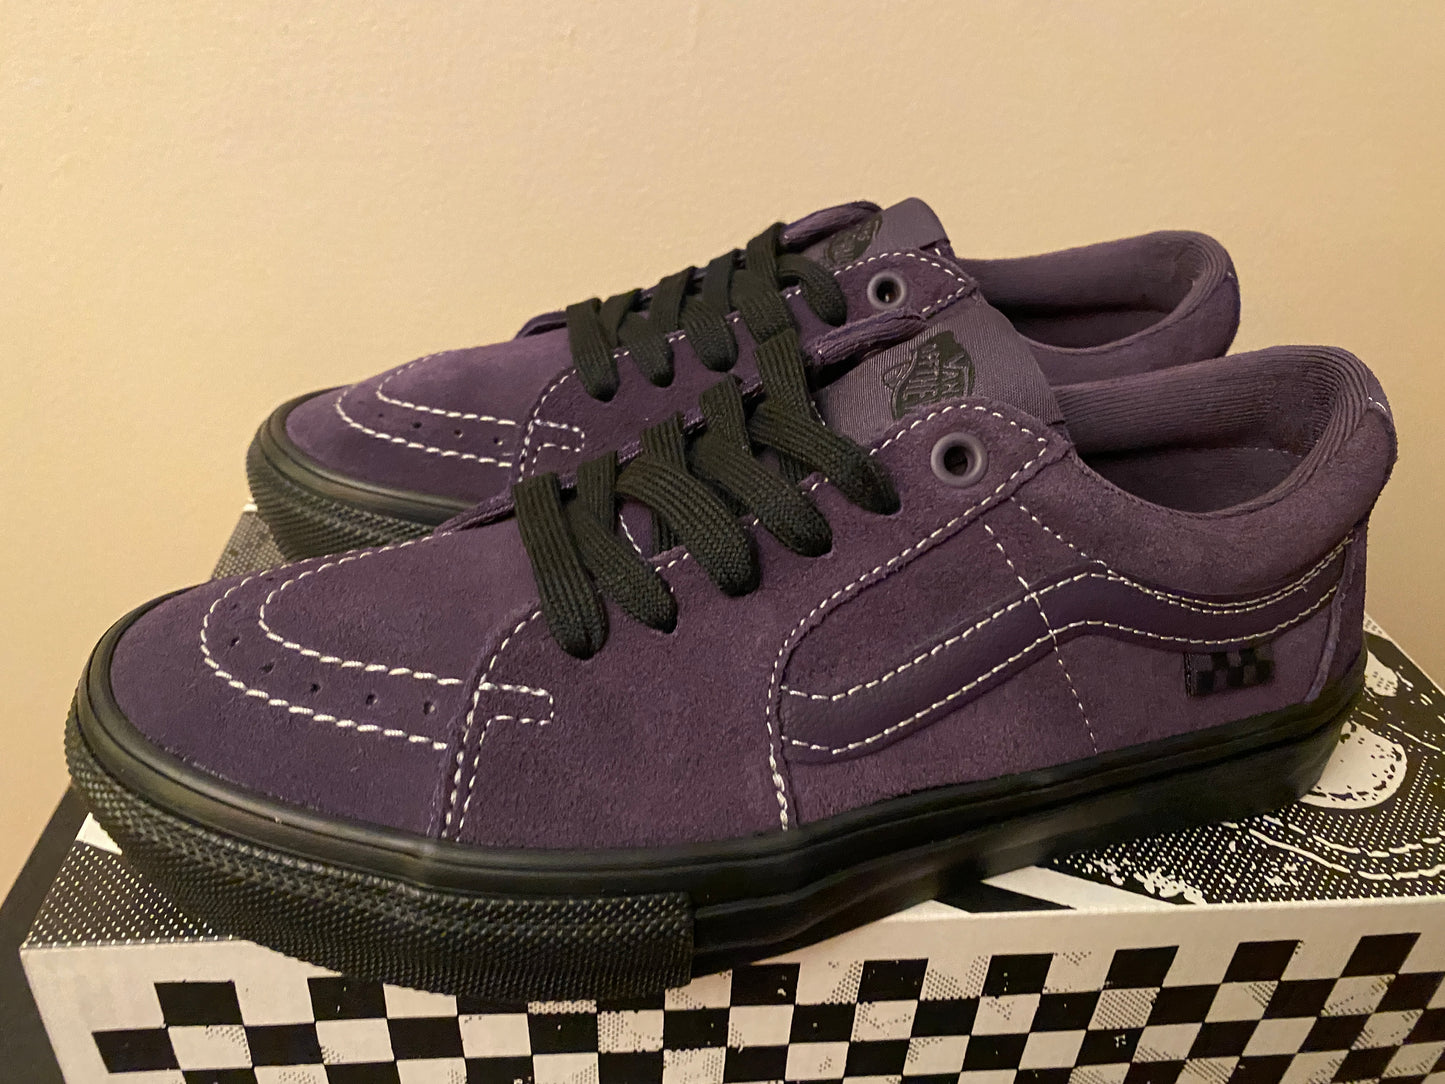 Skate Sk8 Low Shoe Dk.Purp/Blk(size options listed)